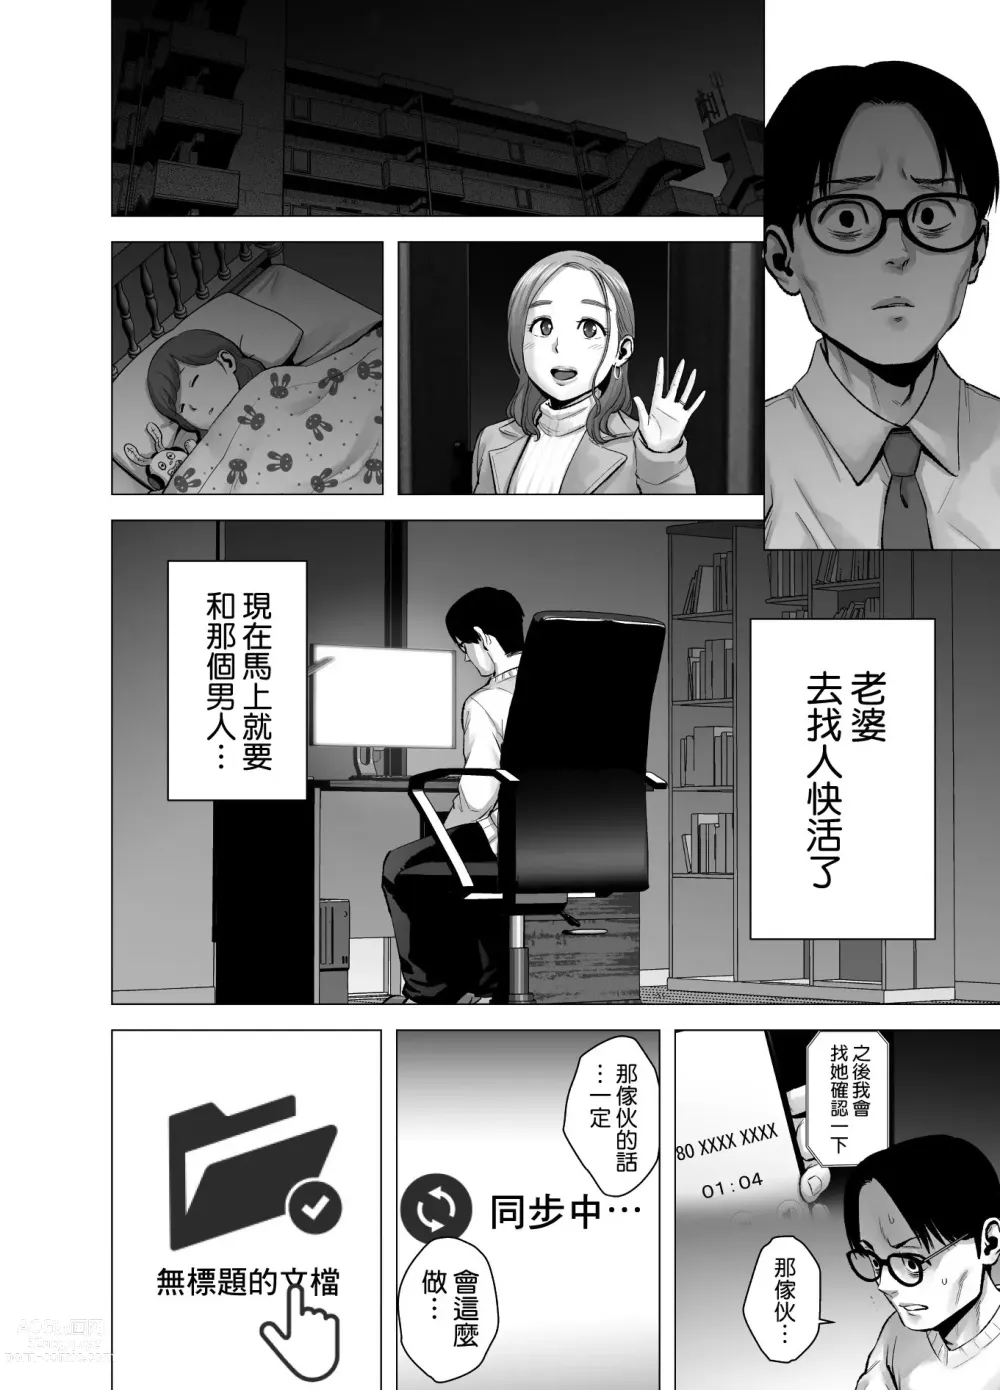 Page 137 of doujinshi Untitled Document 1+2 (decensored)